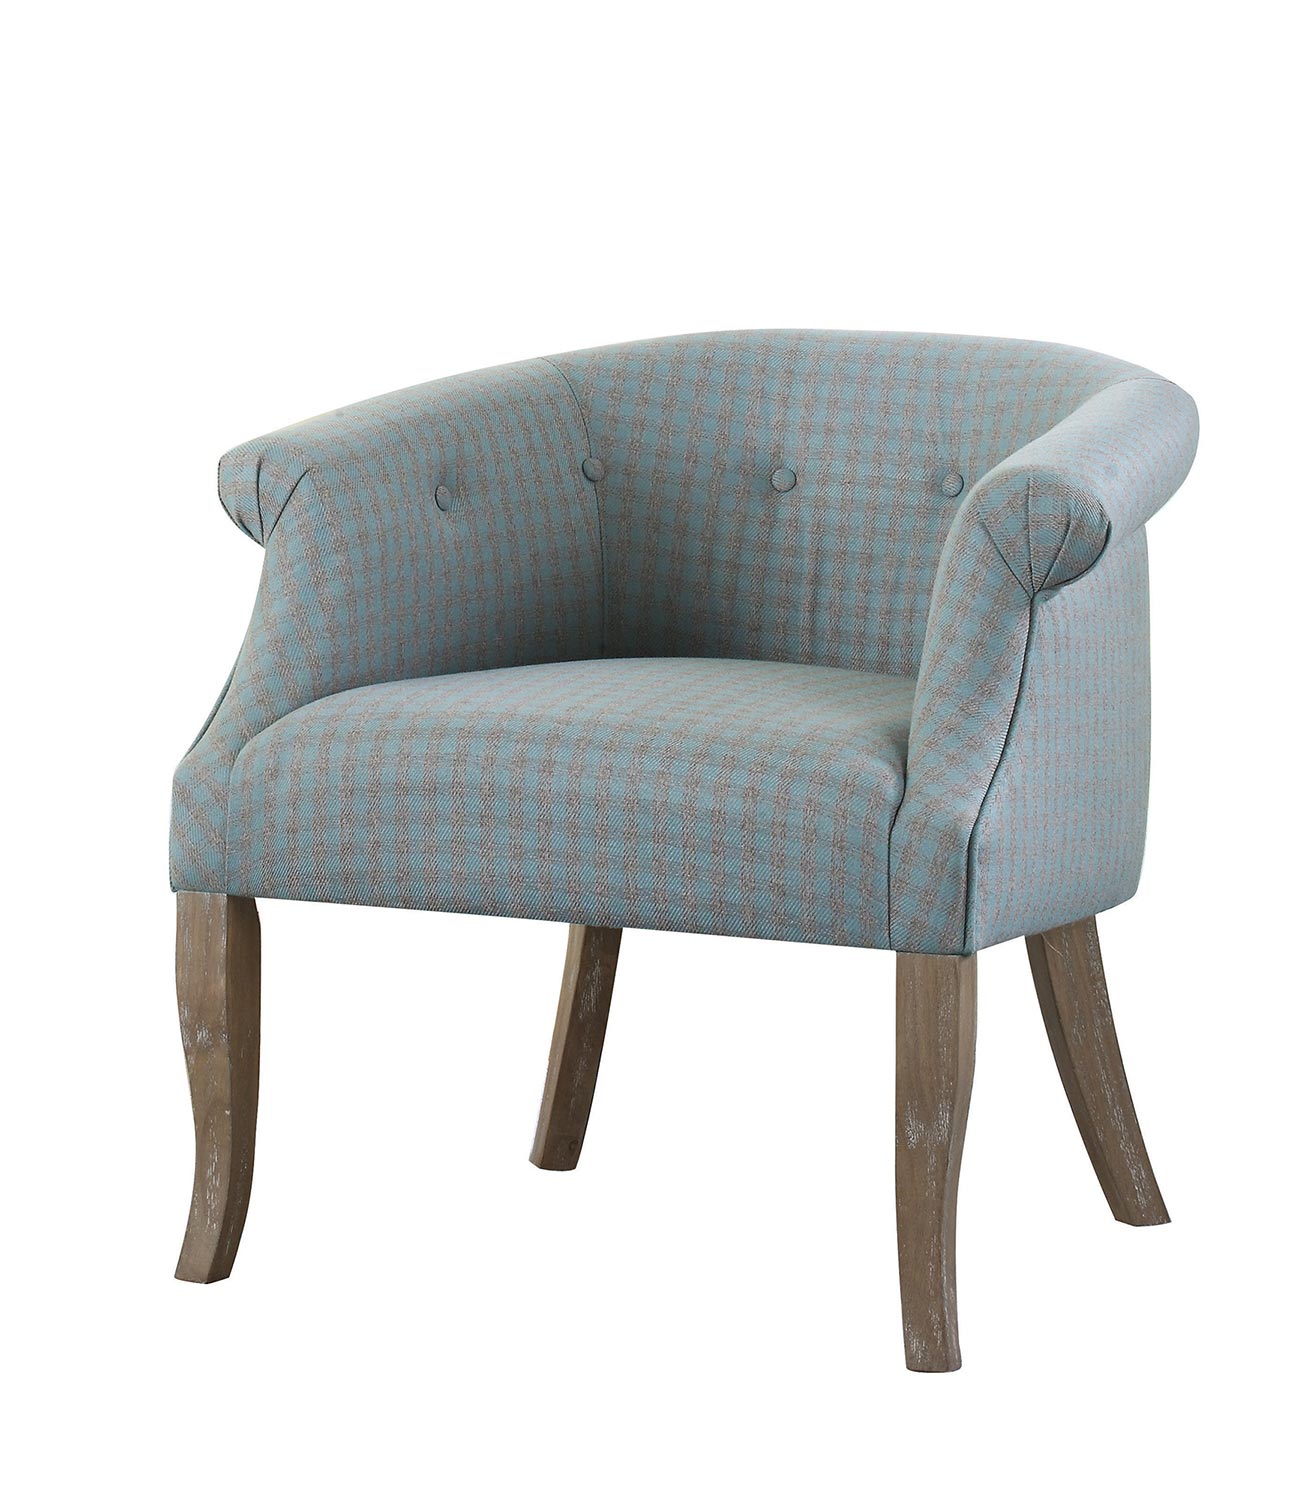 Coaster 903344 Accent Chair - Light Blue/Grey